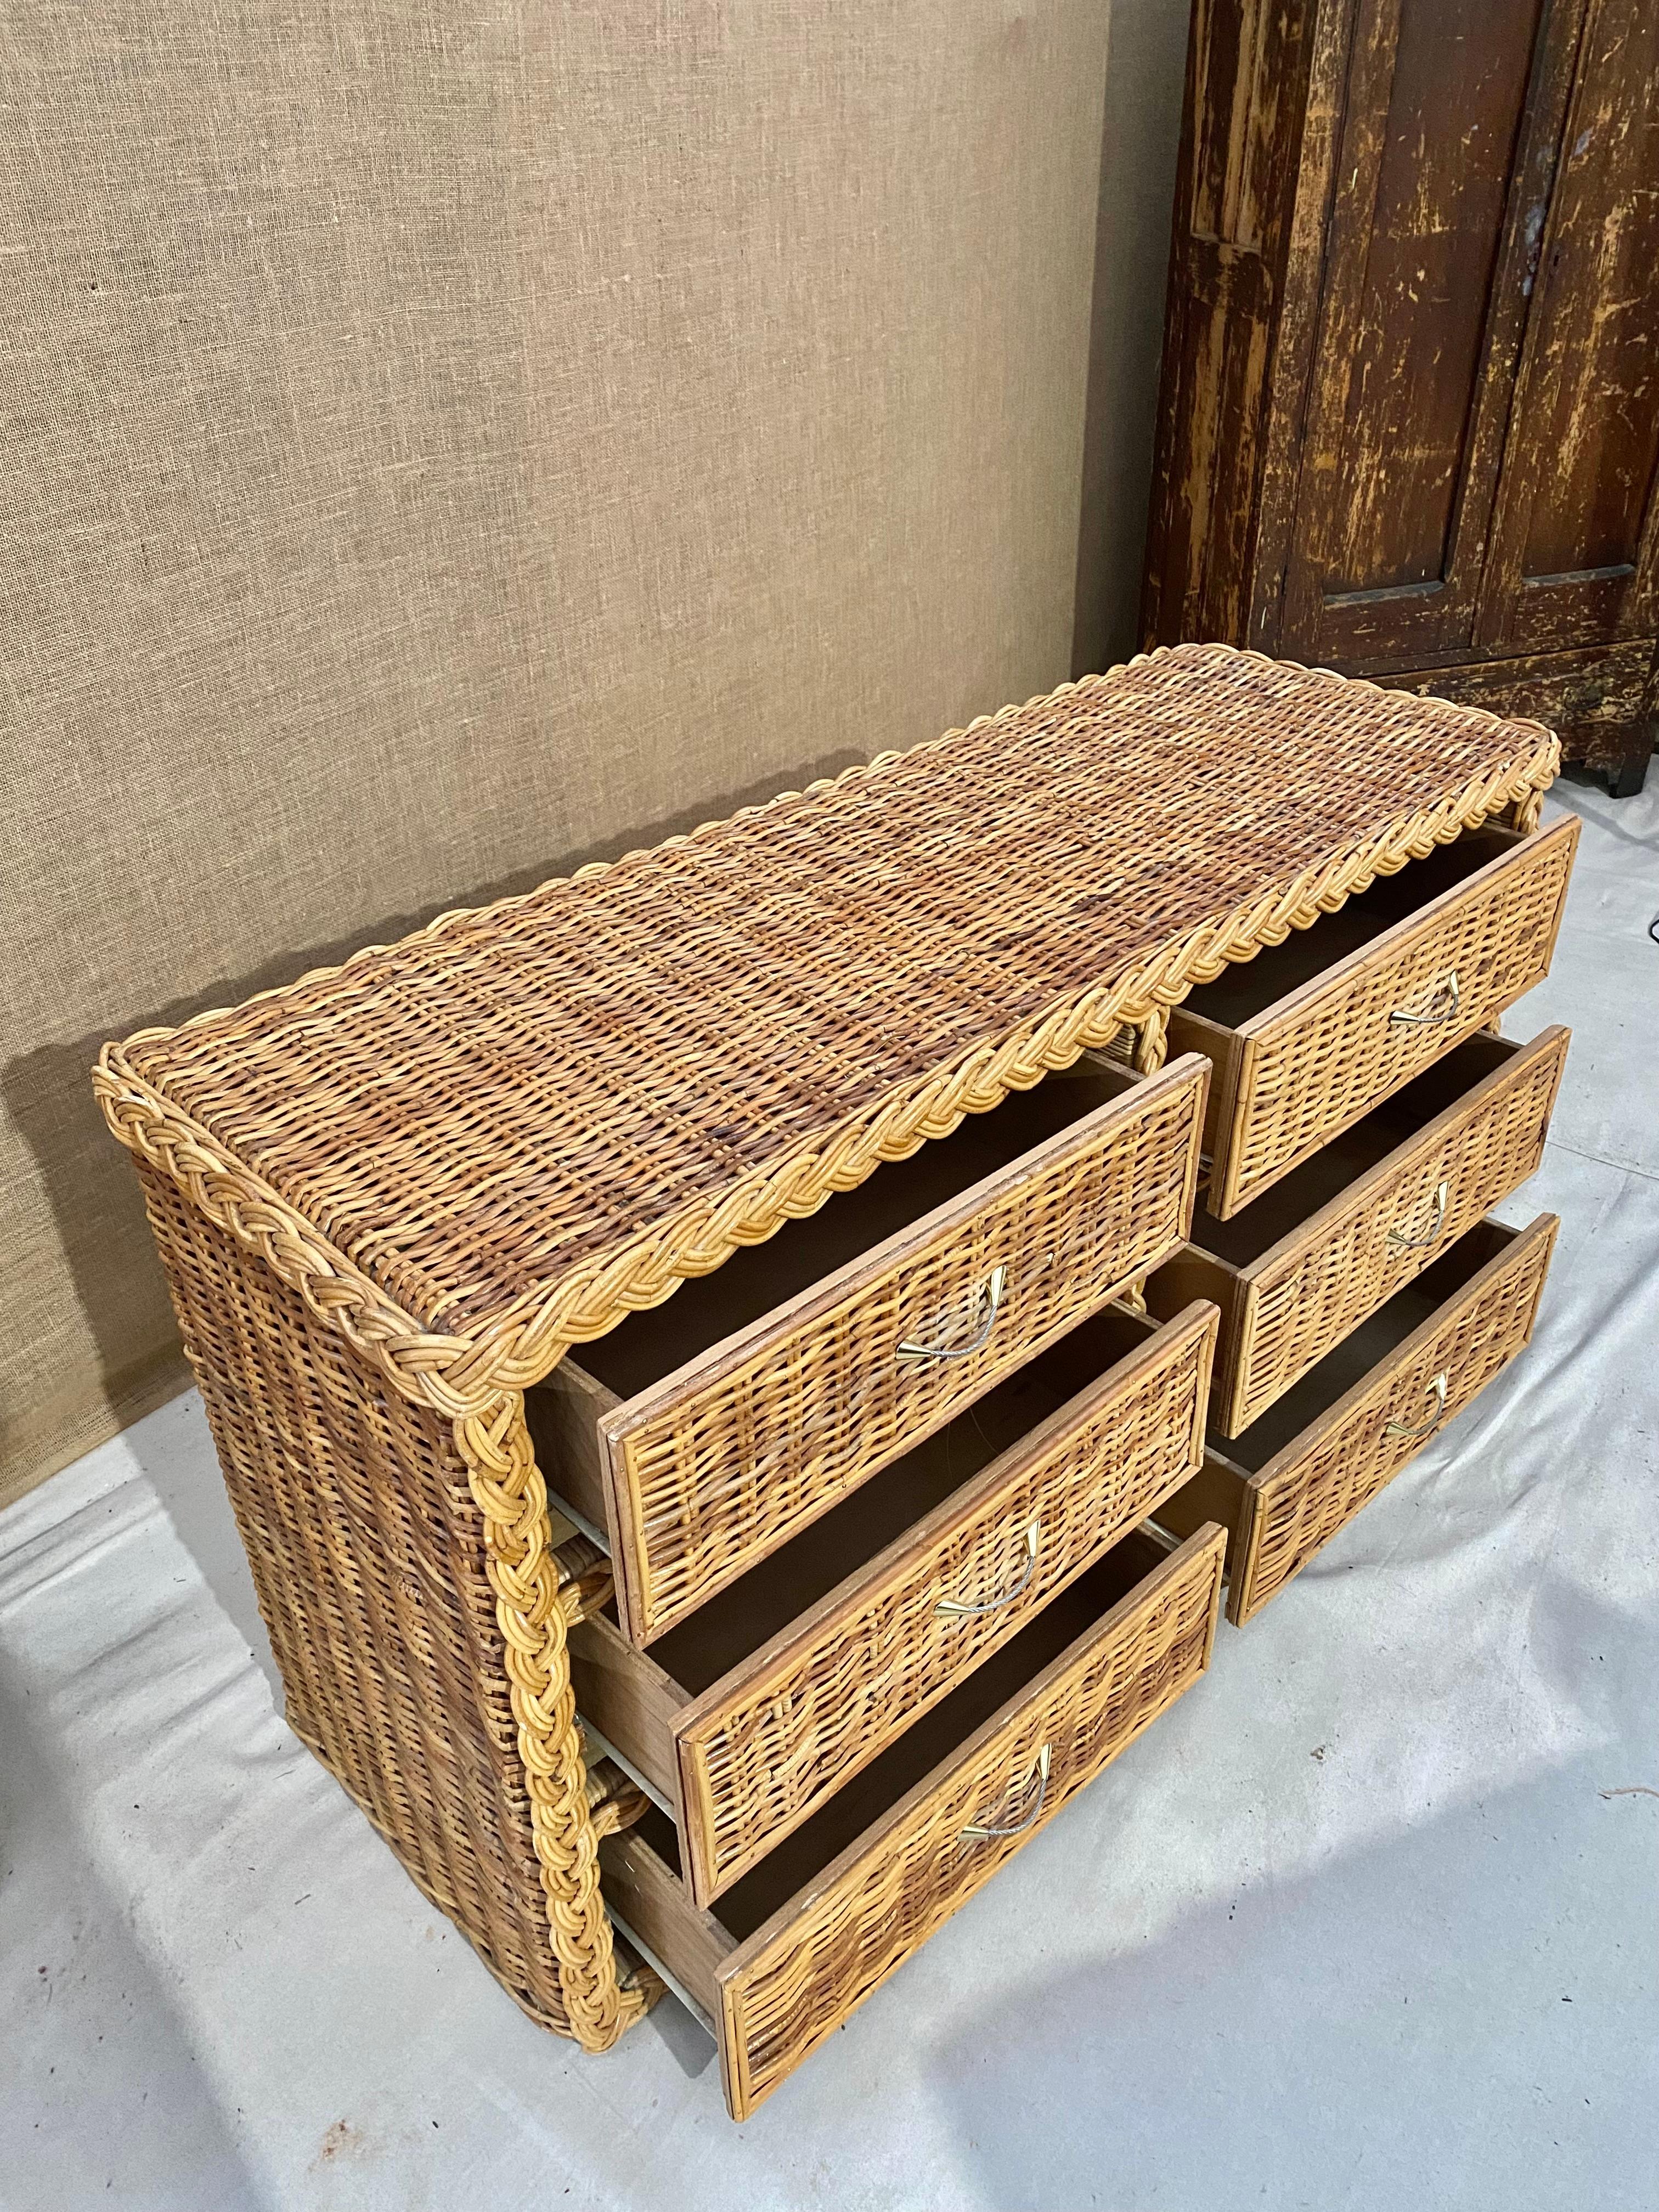 American Braided Rattan 6 Drawer Dresser (After Bielecky Brothers) For Sale